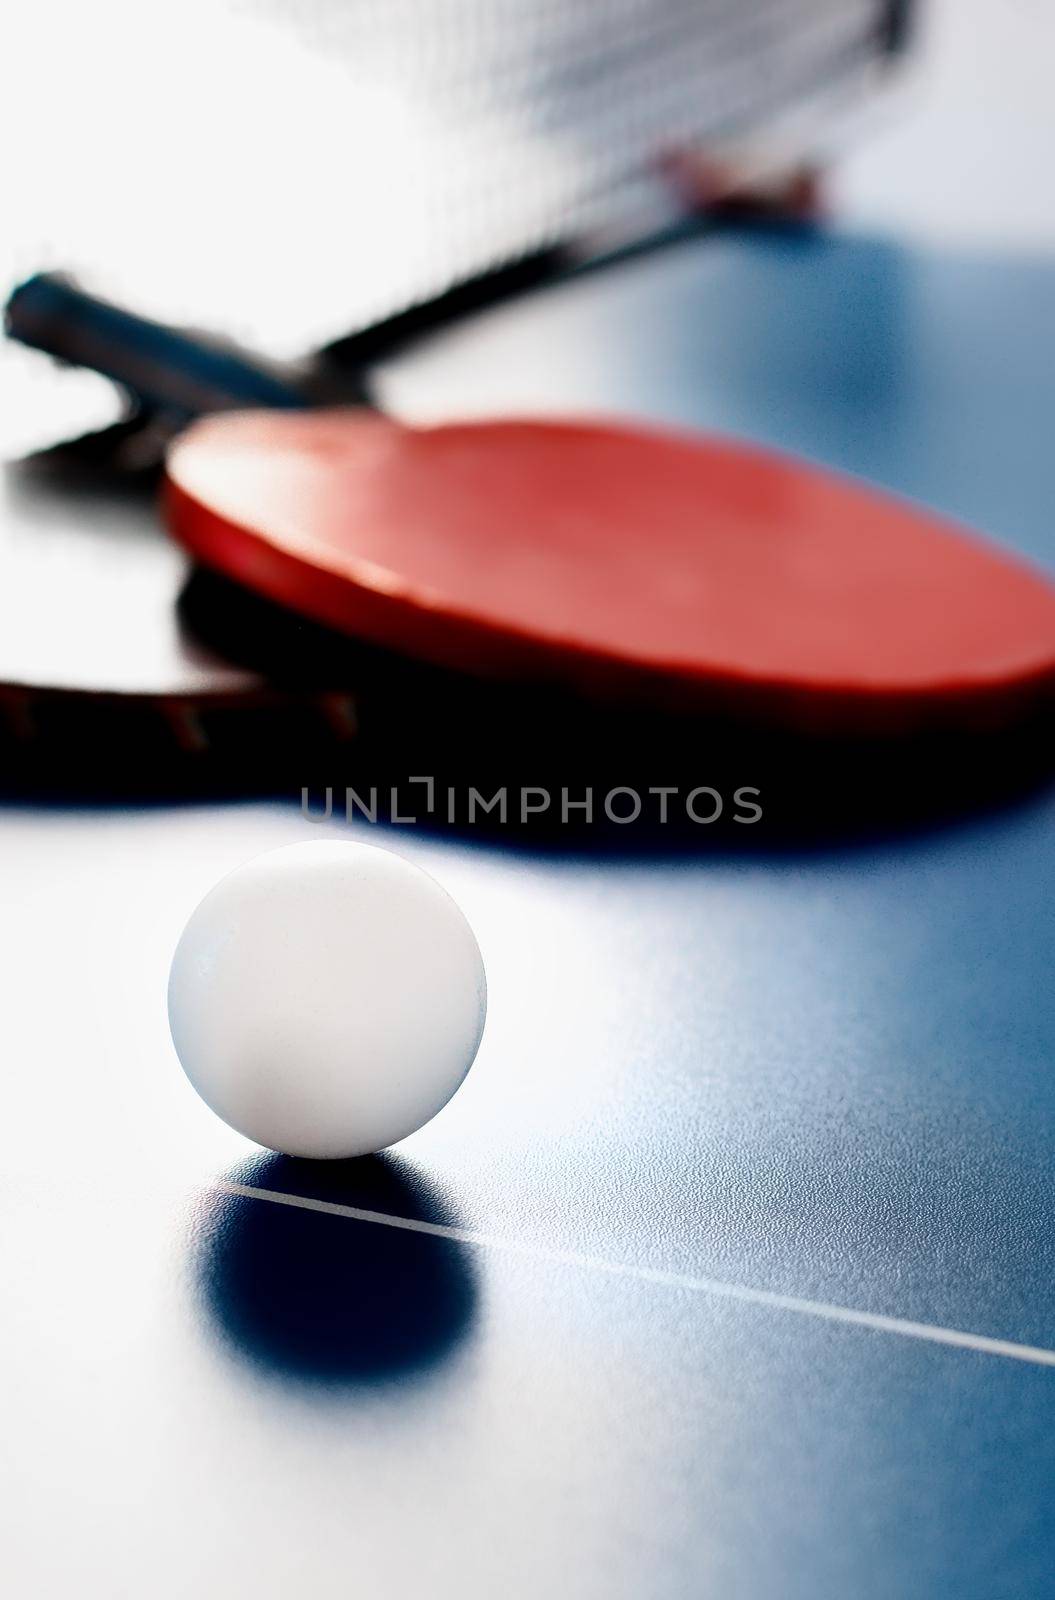 Two tennis rackets and a white ball lie on a tennis table near the net. Active recreation and playing ping pong. Sports background.